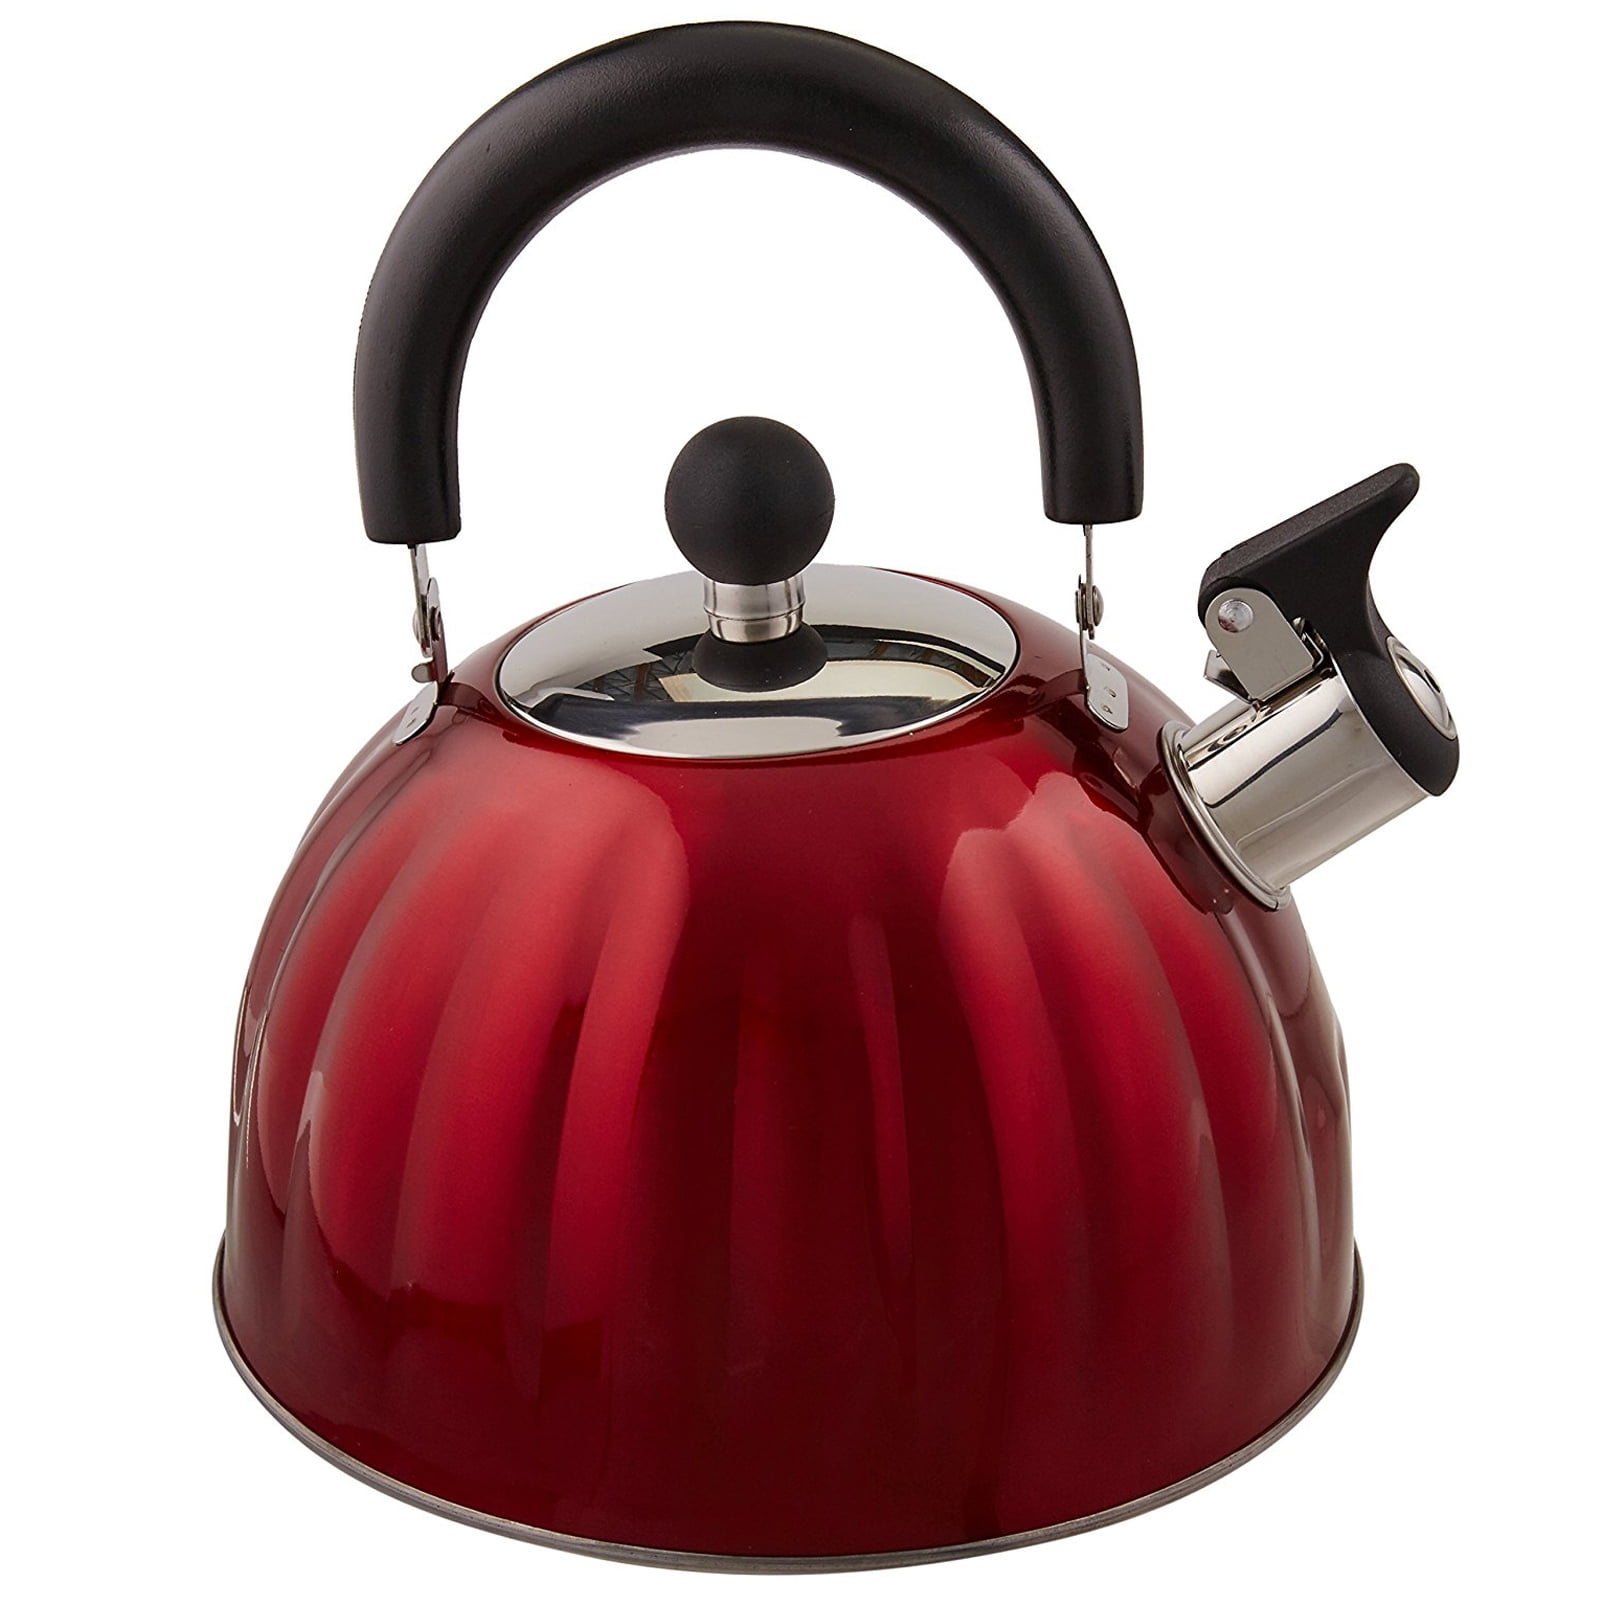 Dr.HOWS Deluxe Stainless Steel Tea Kettle Stovetop 3.5L, Tea Pot Food Grade  Stainless Steel & Folding Silicon Handle, Easy to Clean Suitable for All